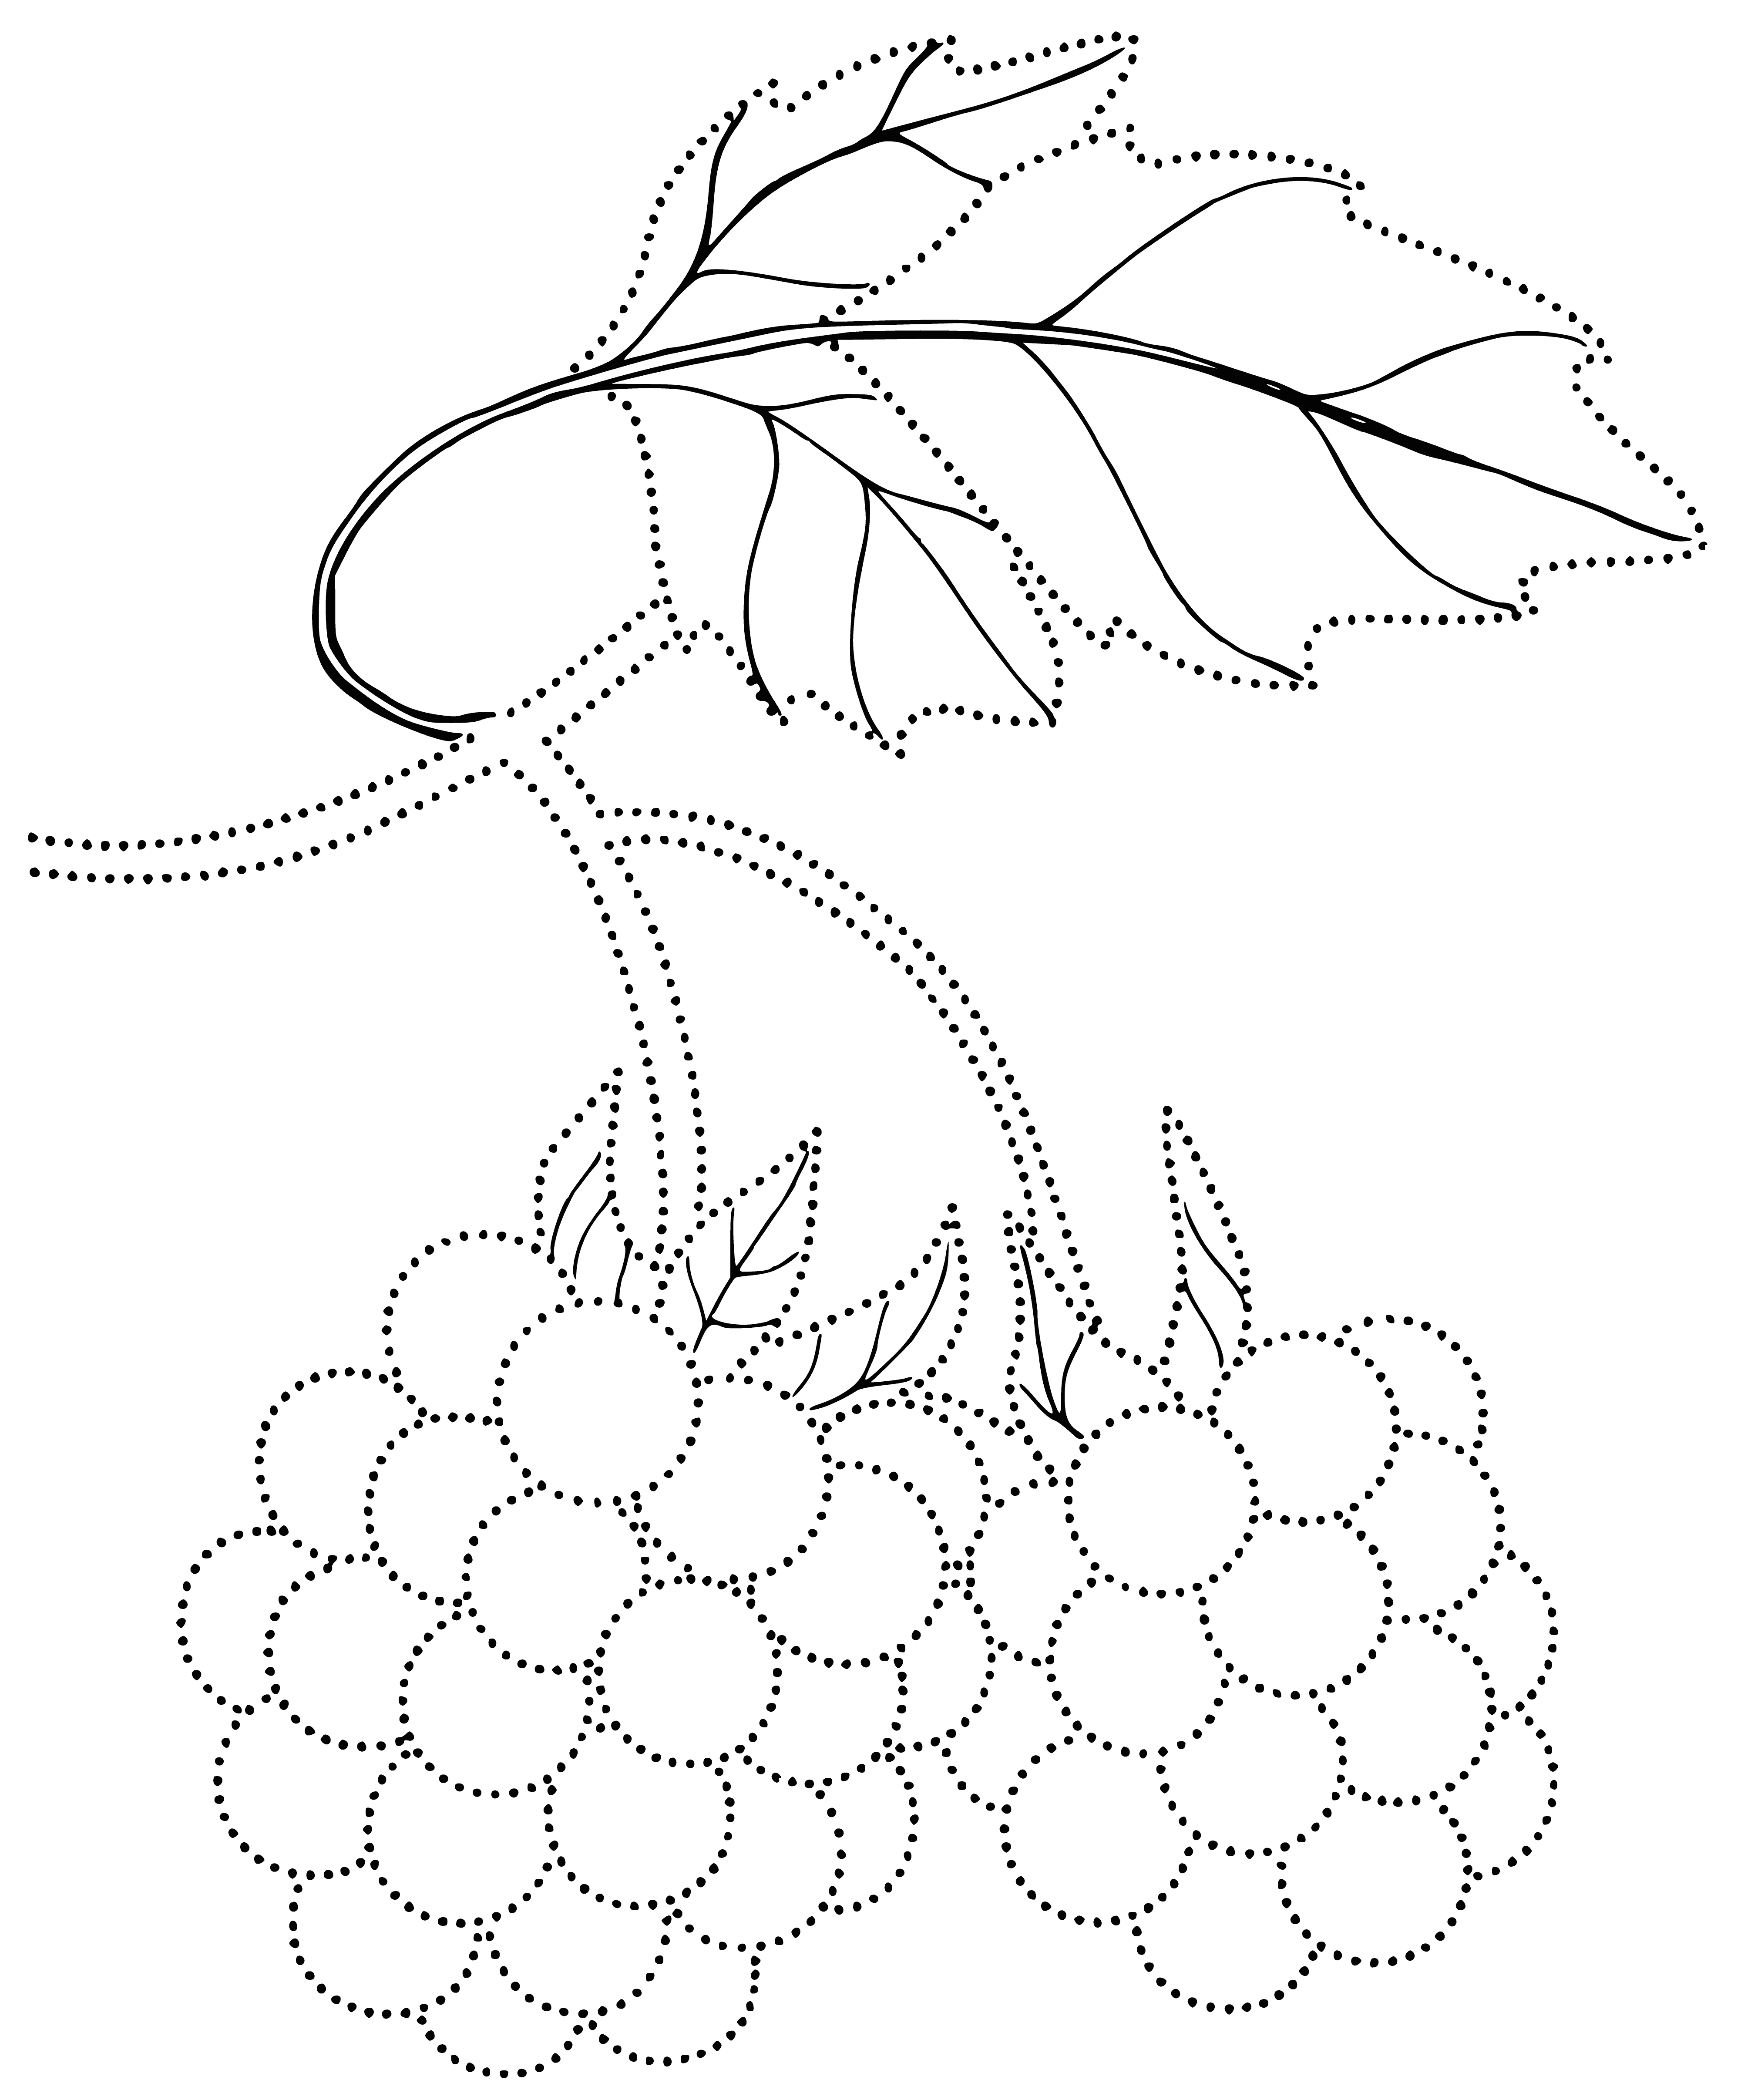 coloring page: Cluster of red berries with seeds outside, likely sweet & tangy.